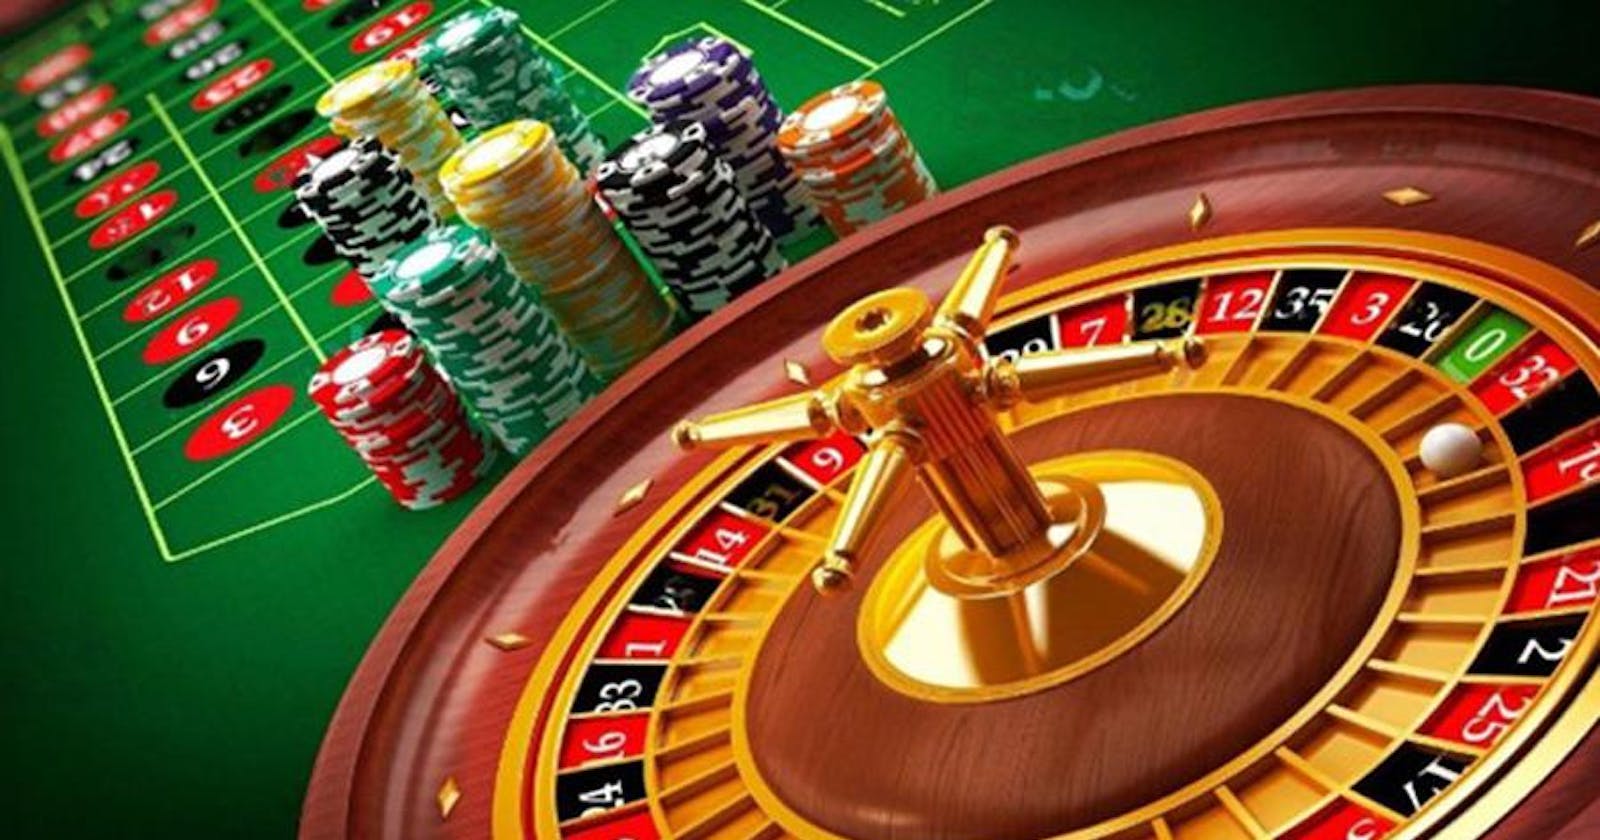 Fun Casino Company - Indulge in Wagering Fantasies Without Going Bankrupt!